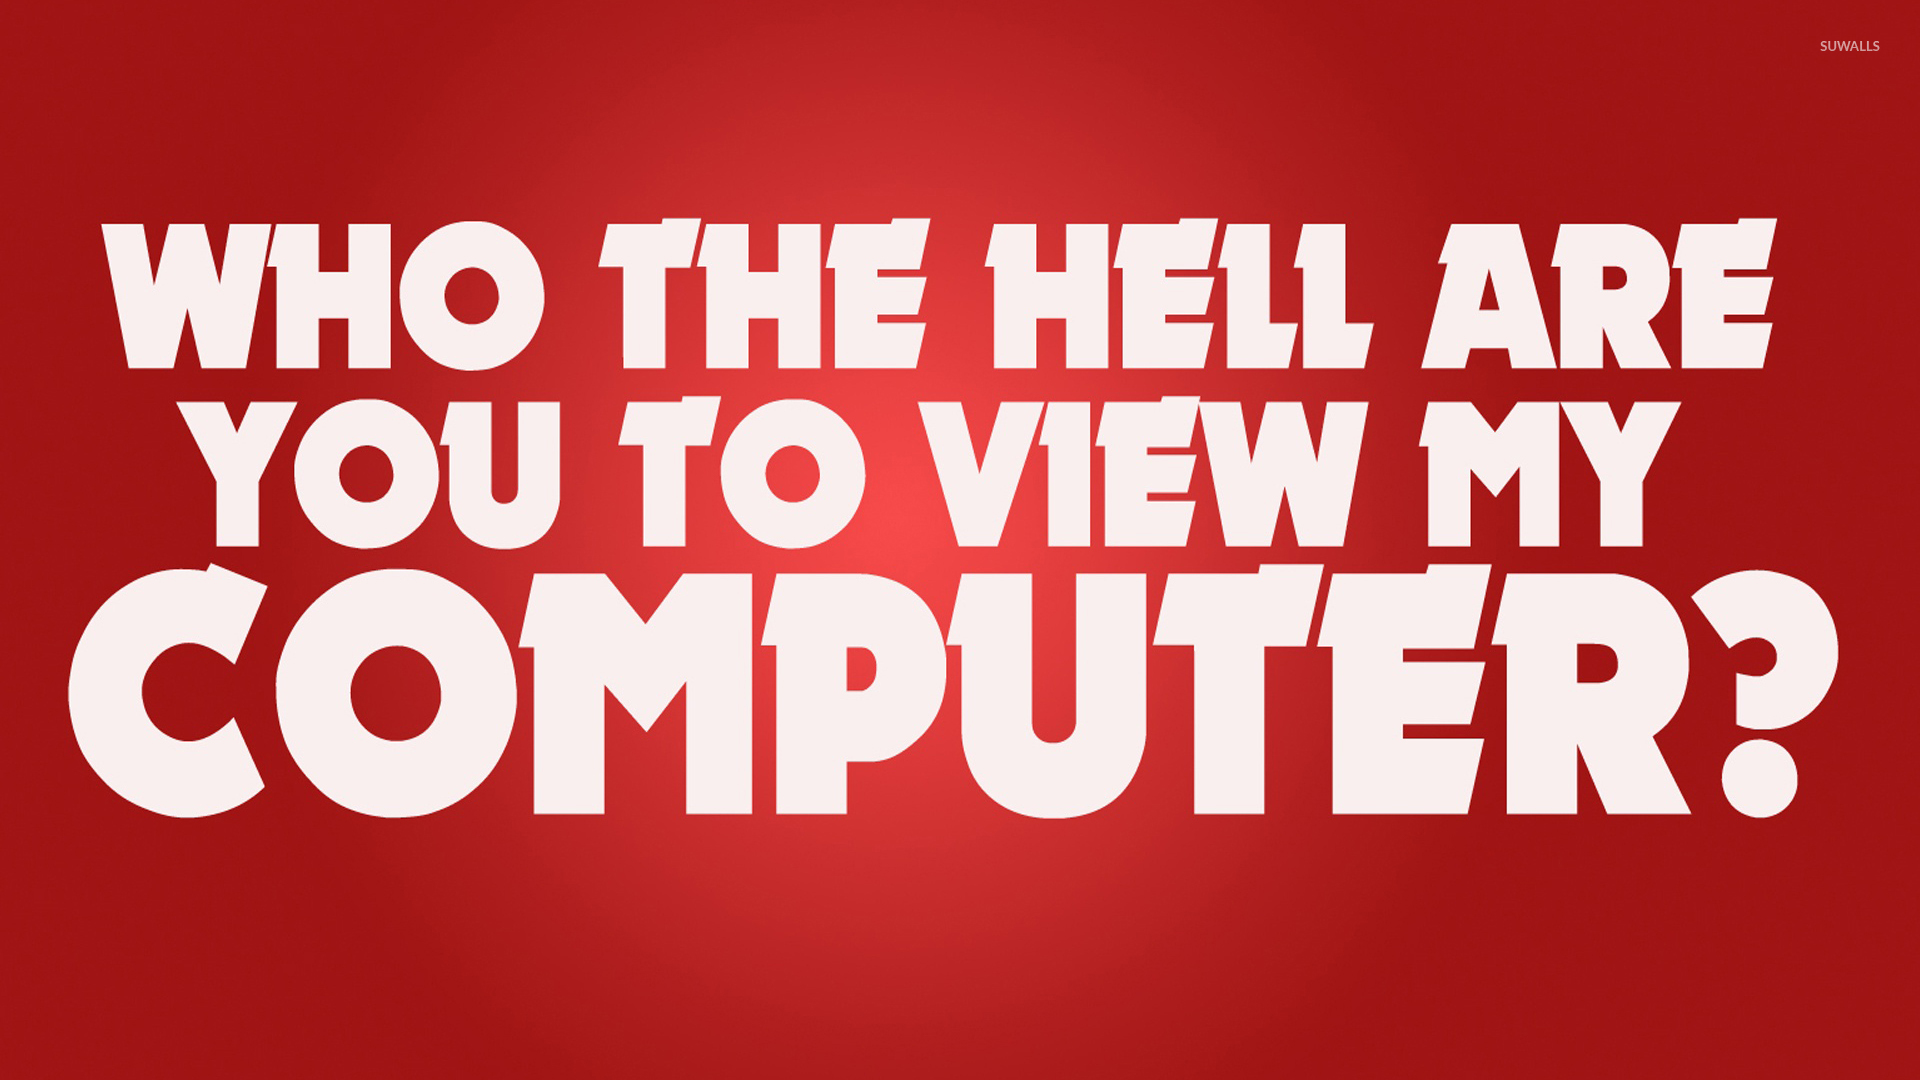 Hell Are You To Open My Computer